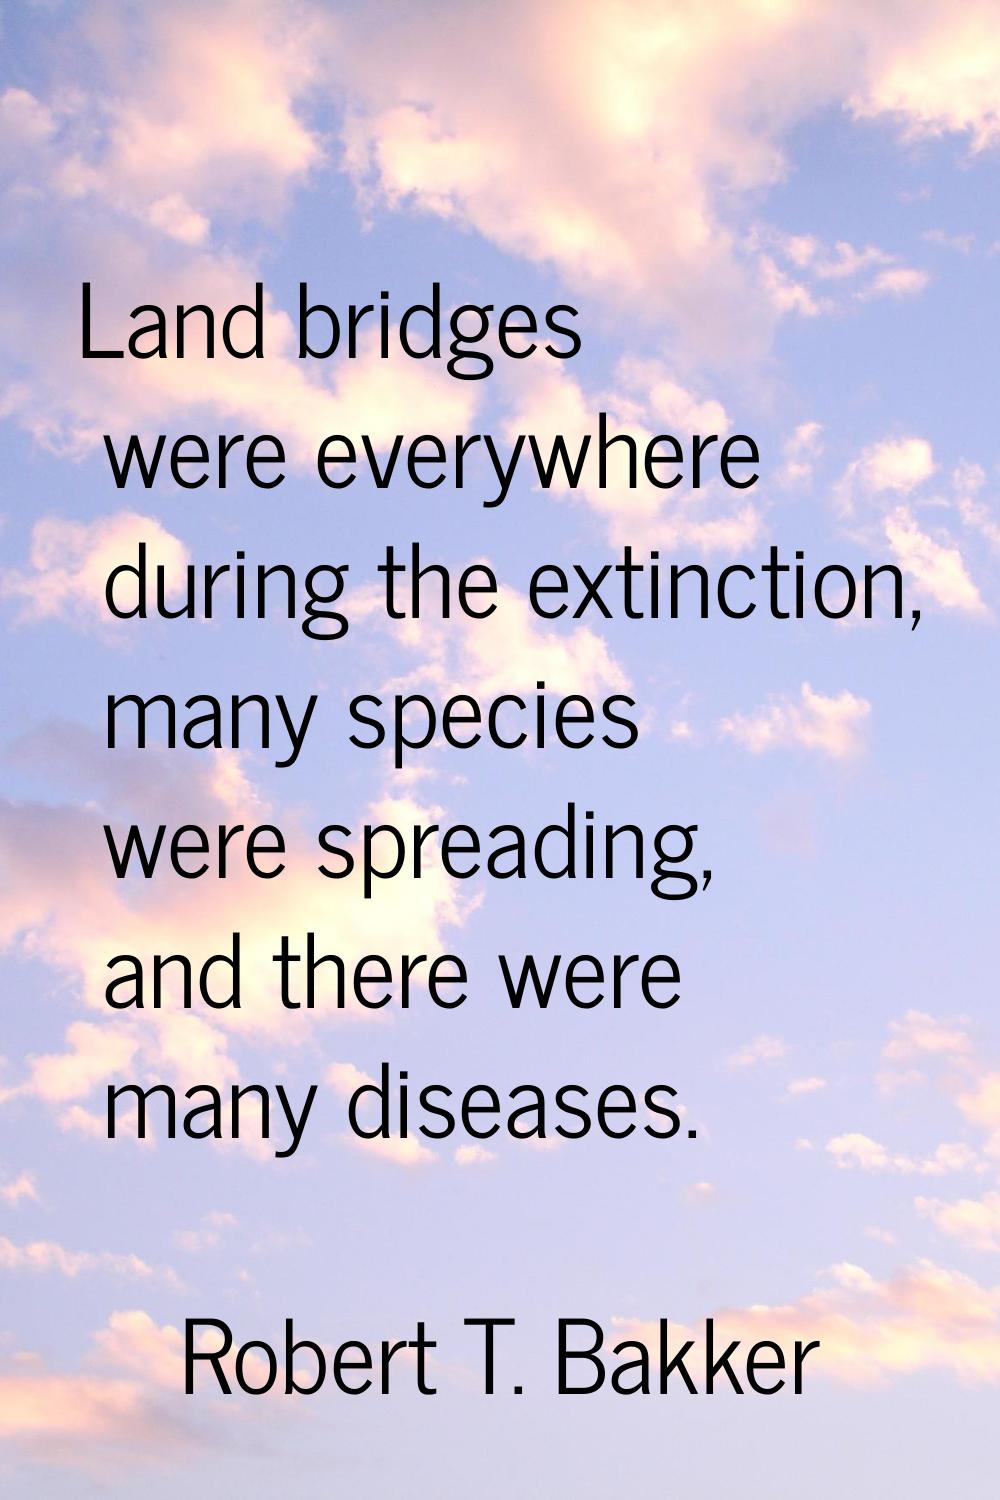 Land bridges were everywhere during the extinction, many species were spreading, and there were man